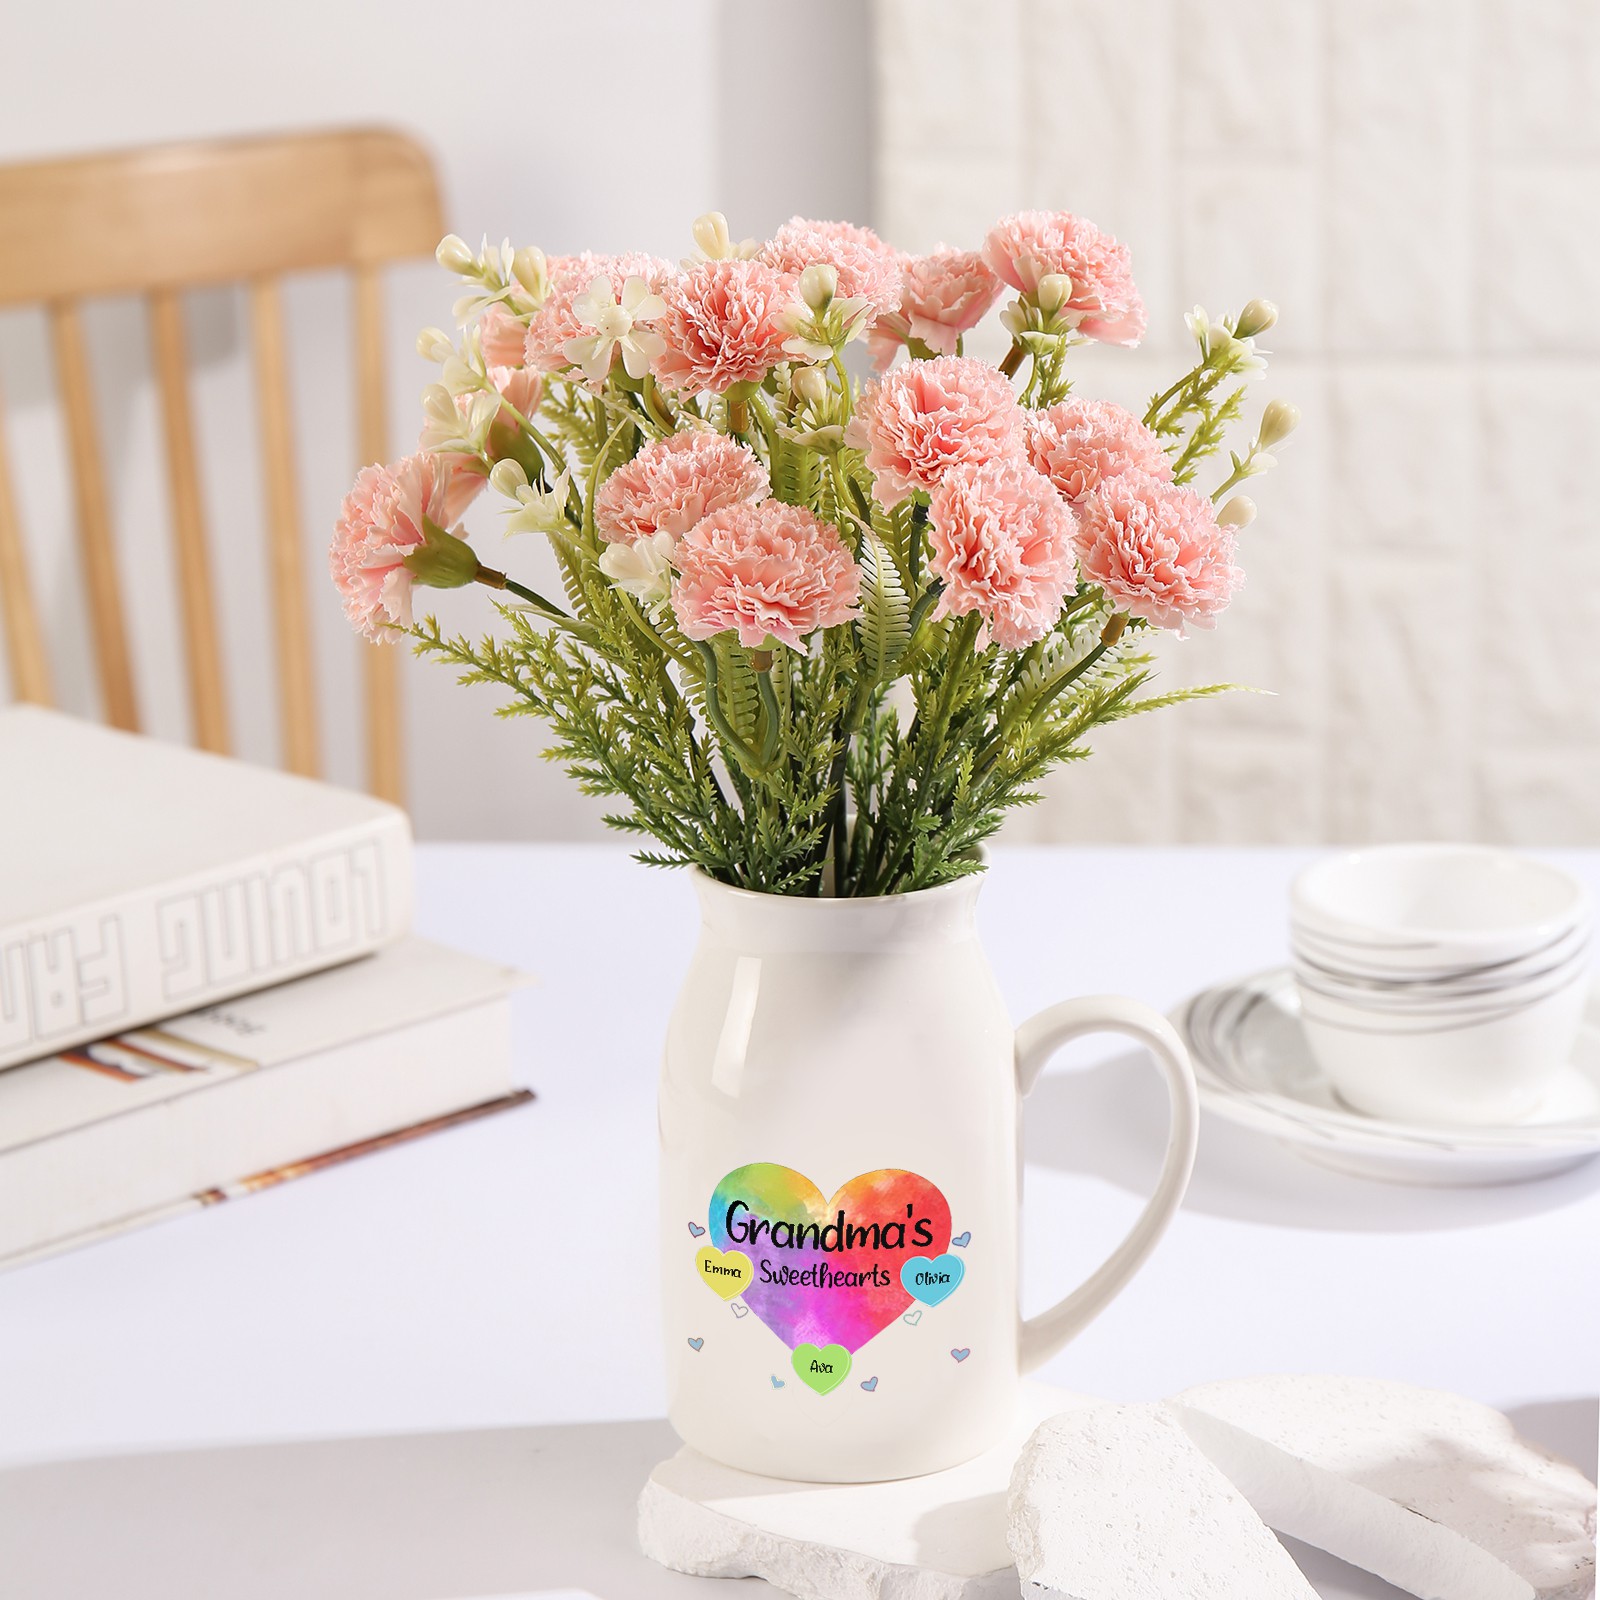 3 Names - Personalized Customizable Name Colorful Love Heart Style Ceramic Vase as a Gift for Grandma